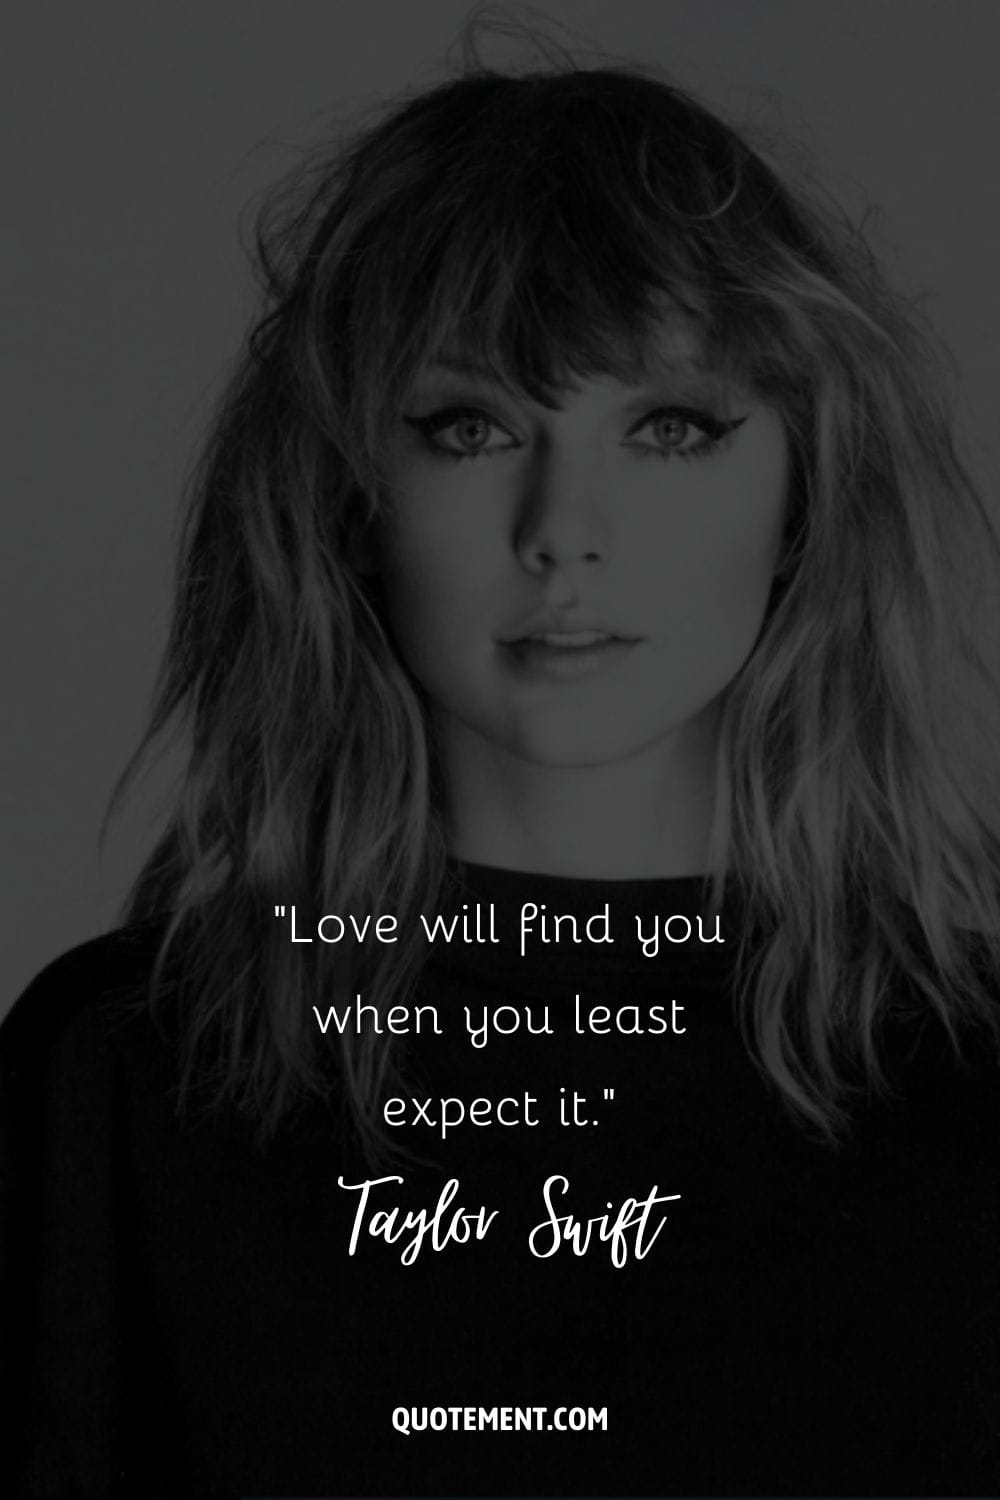 “Love will find you when you least expect it.” ― Taylor Swift